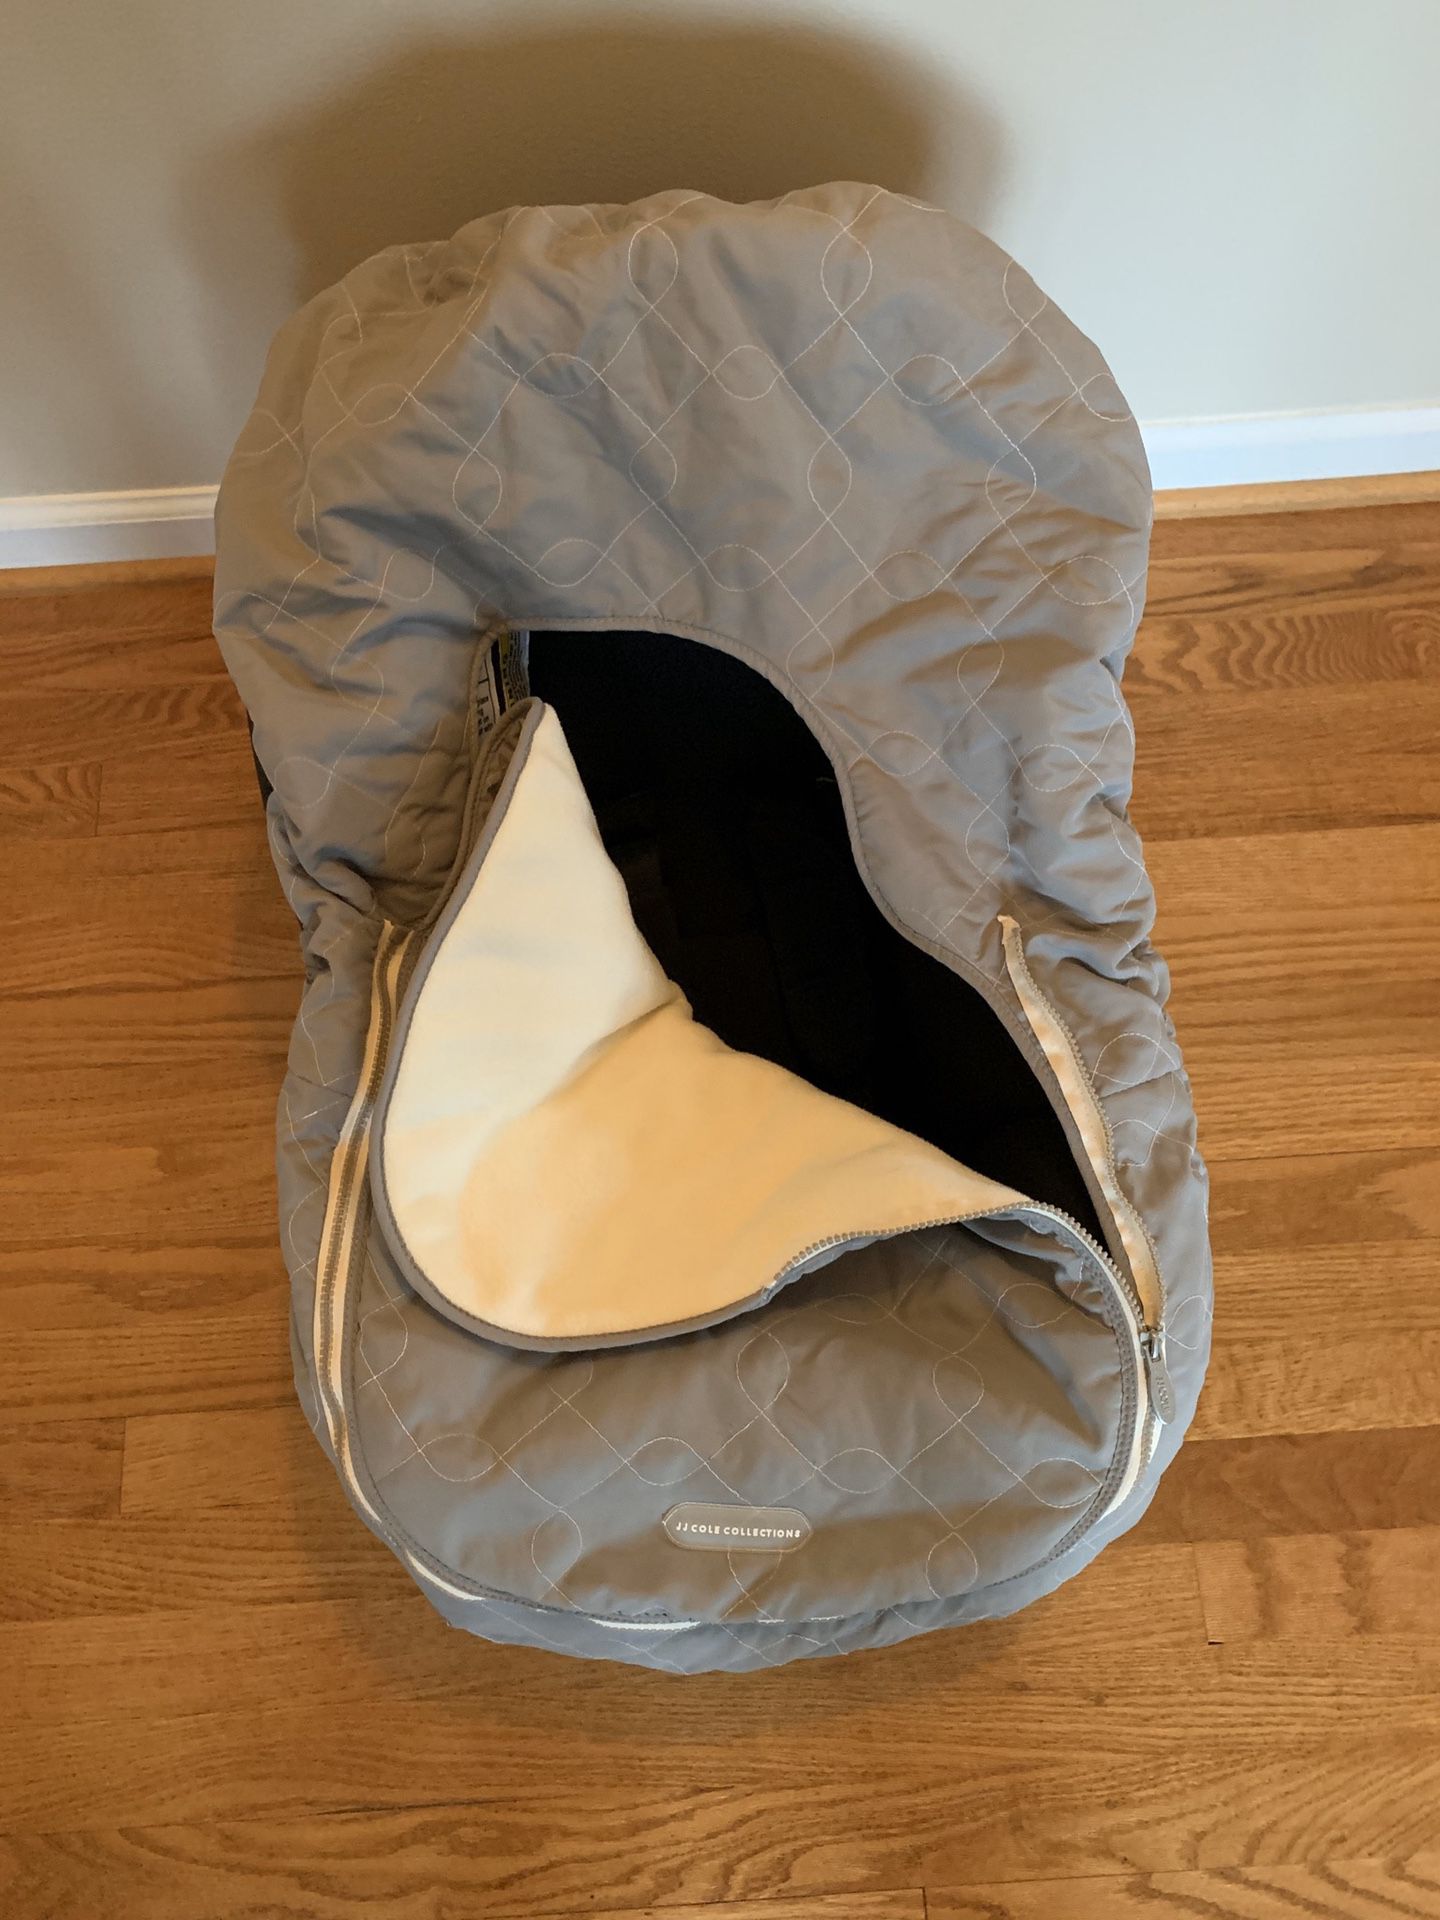 Winter baby car seat cover (JJ Cole)